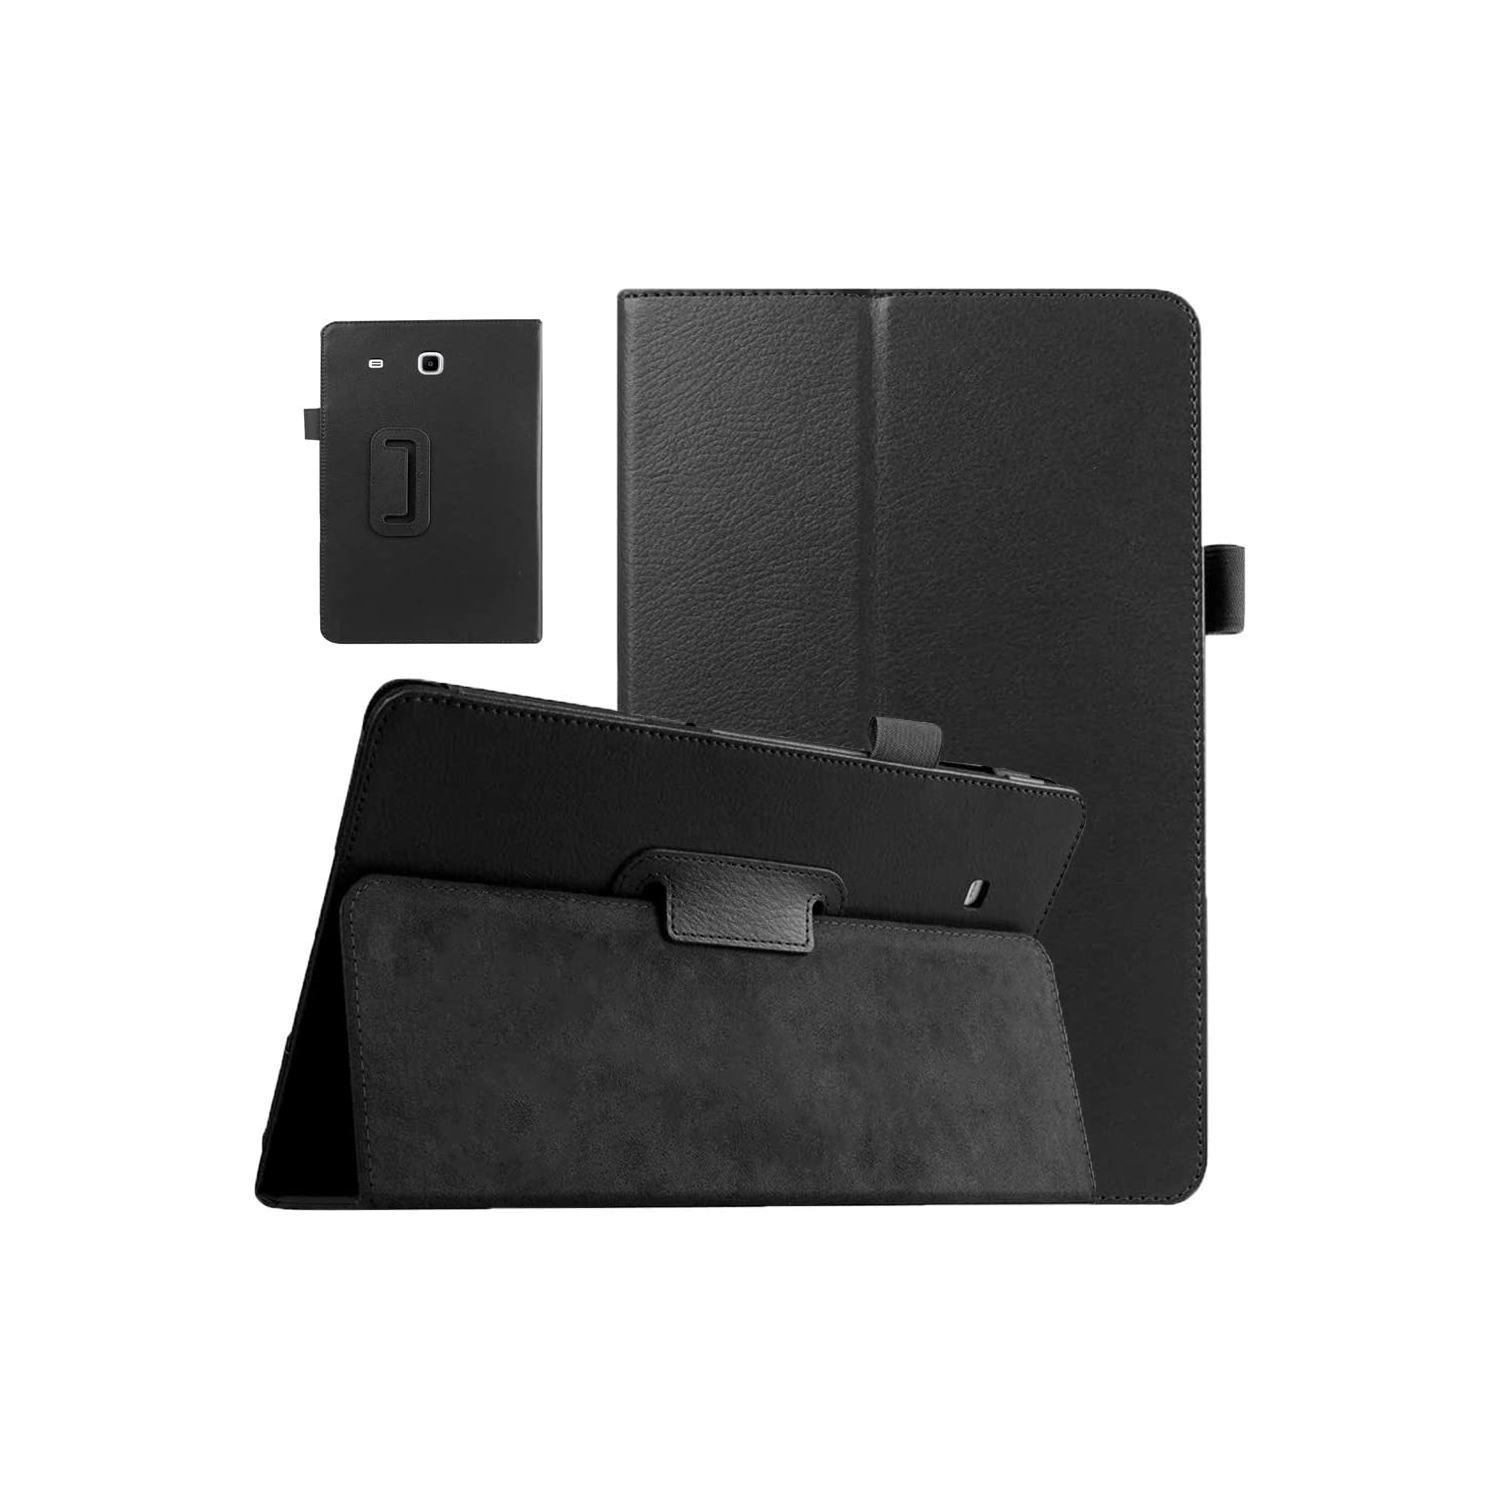 E Case for Tab E 9.6 Model T560, Slim Leather Folio Standing Case for Samsung Galaxy Tab E 9.6 Inch 2015 Released Tablet (SM-T560 T561 T565 T567) - Black